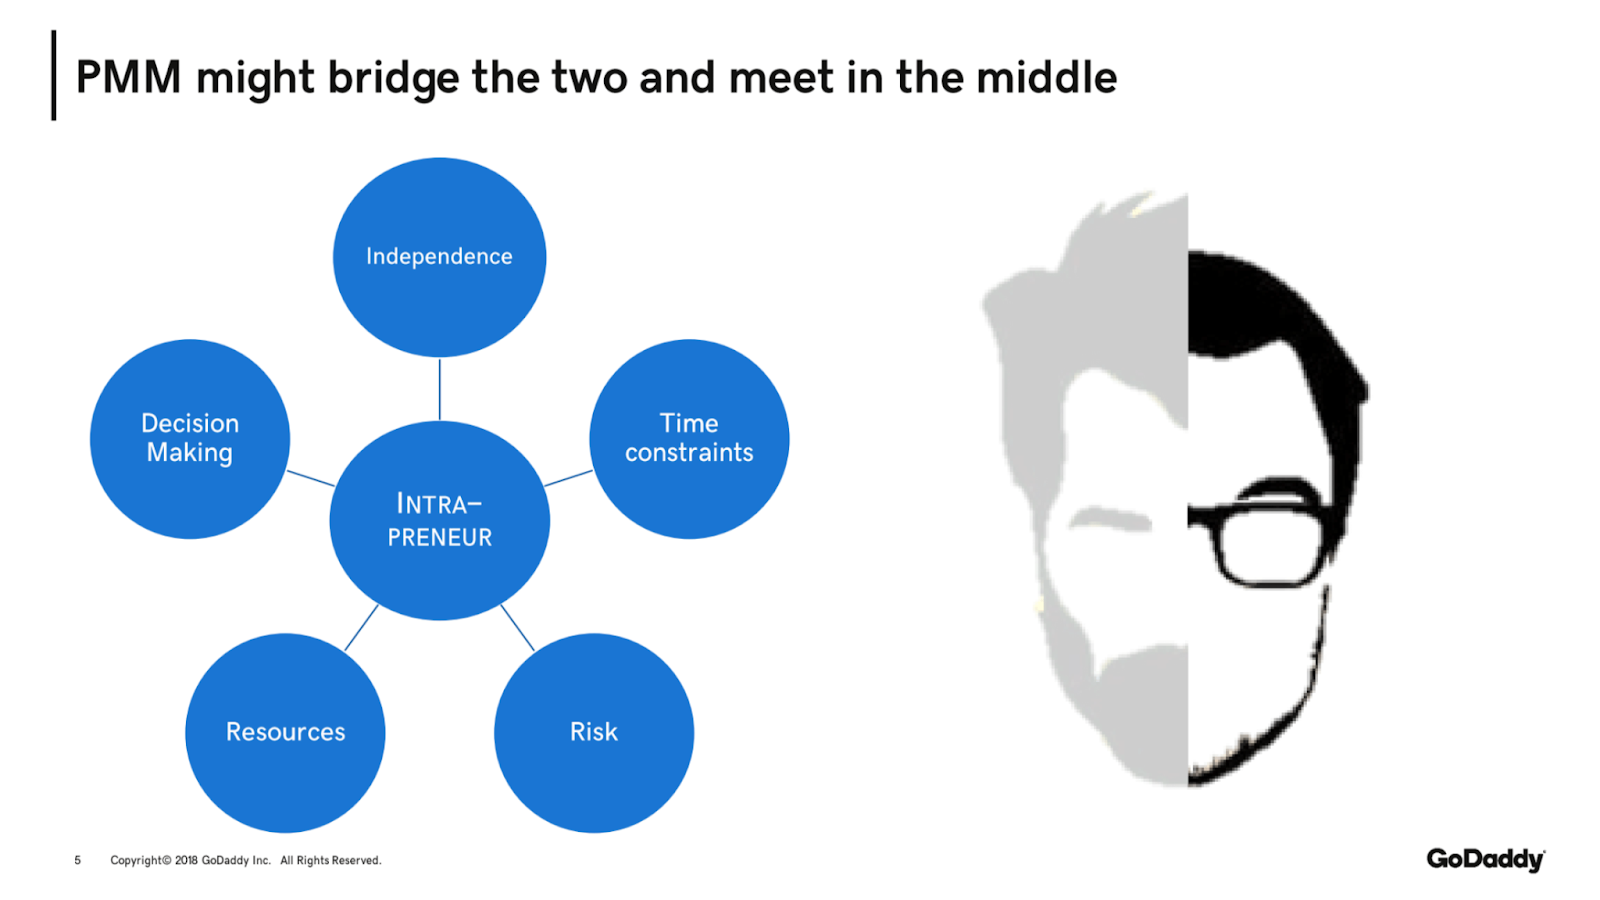 Bridging the gap between startups and enterprises and meeting in the middle.